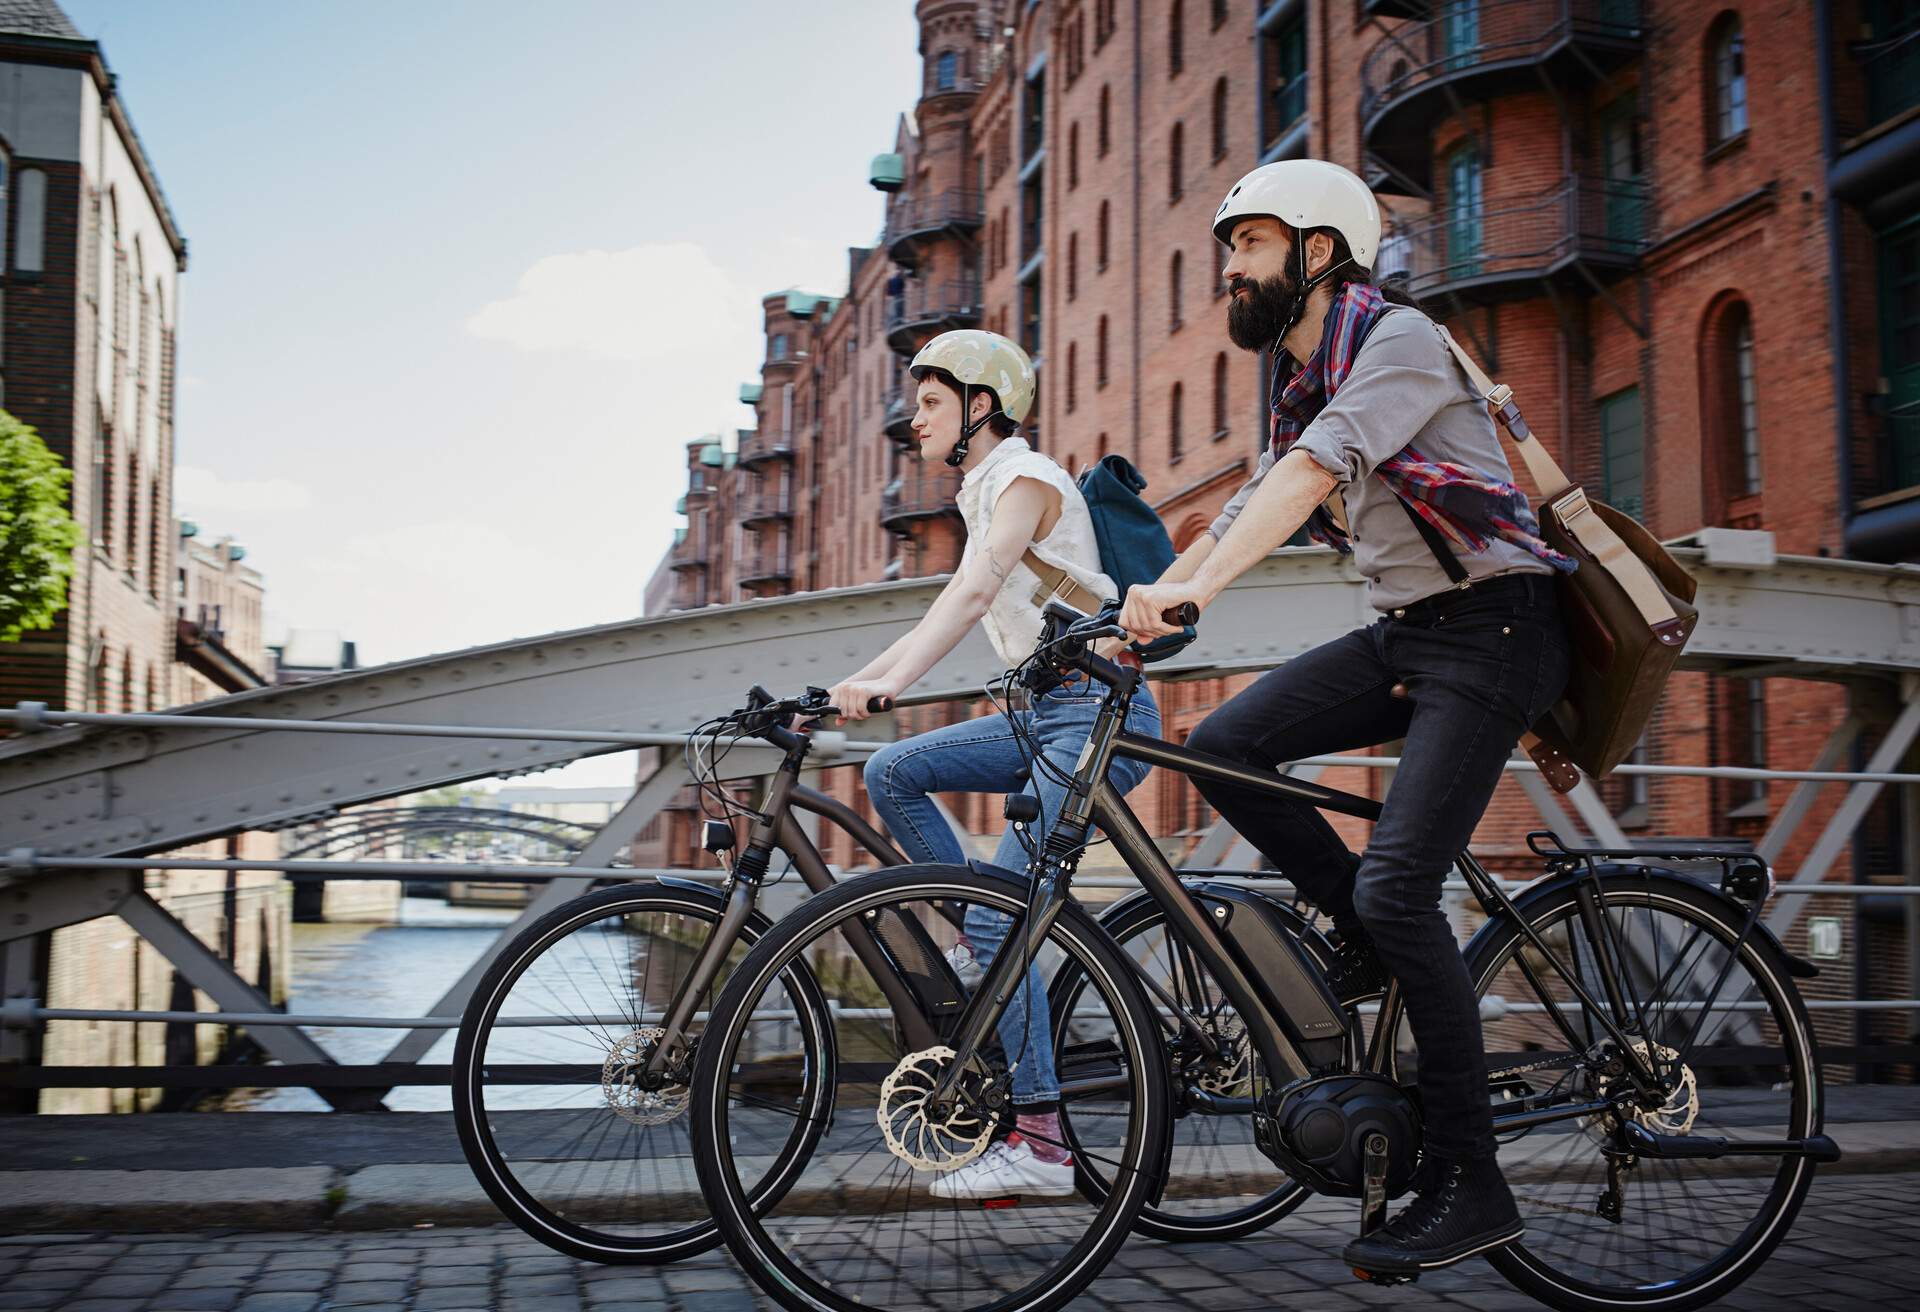 DEST_GERMANY_HAMBURG_THEME_CYCLING_BICYCLE_GettyImages-709139297